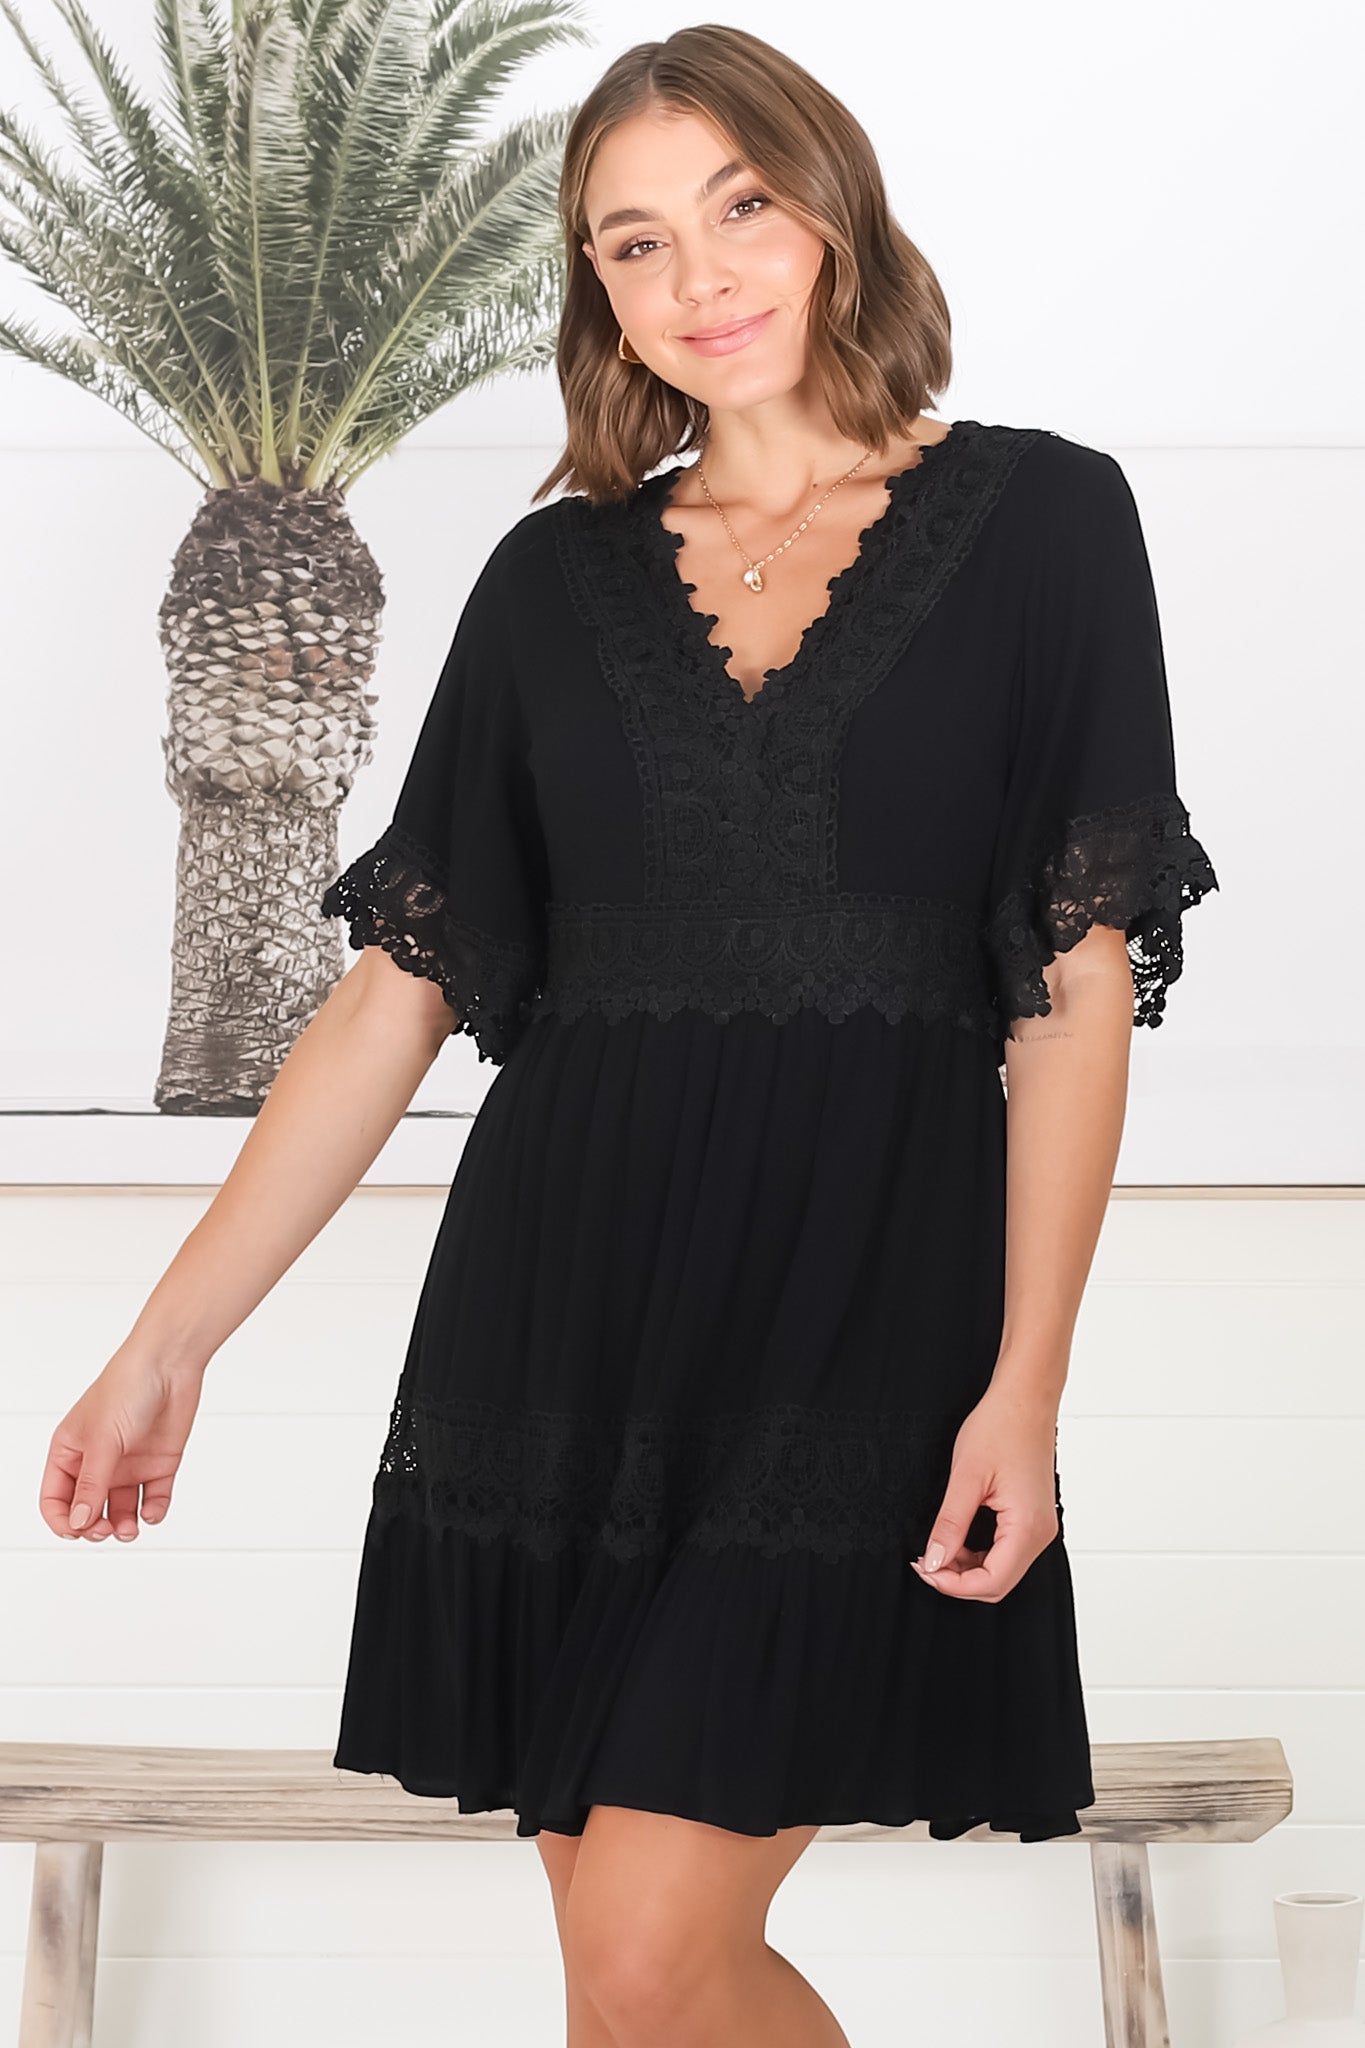 Leelie Mini Dress - Lace Embelished Tiered Dress with Bell Sleeves in Black